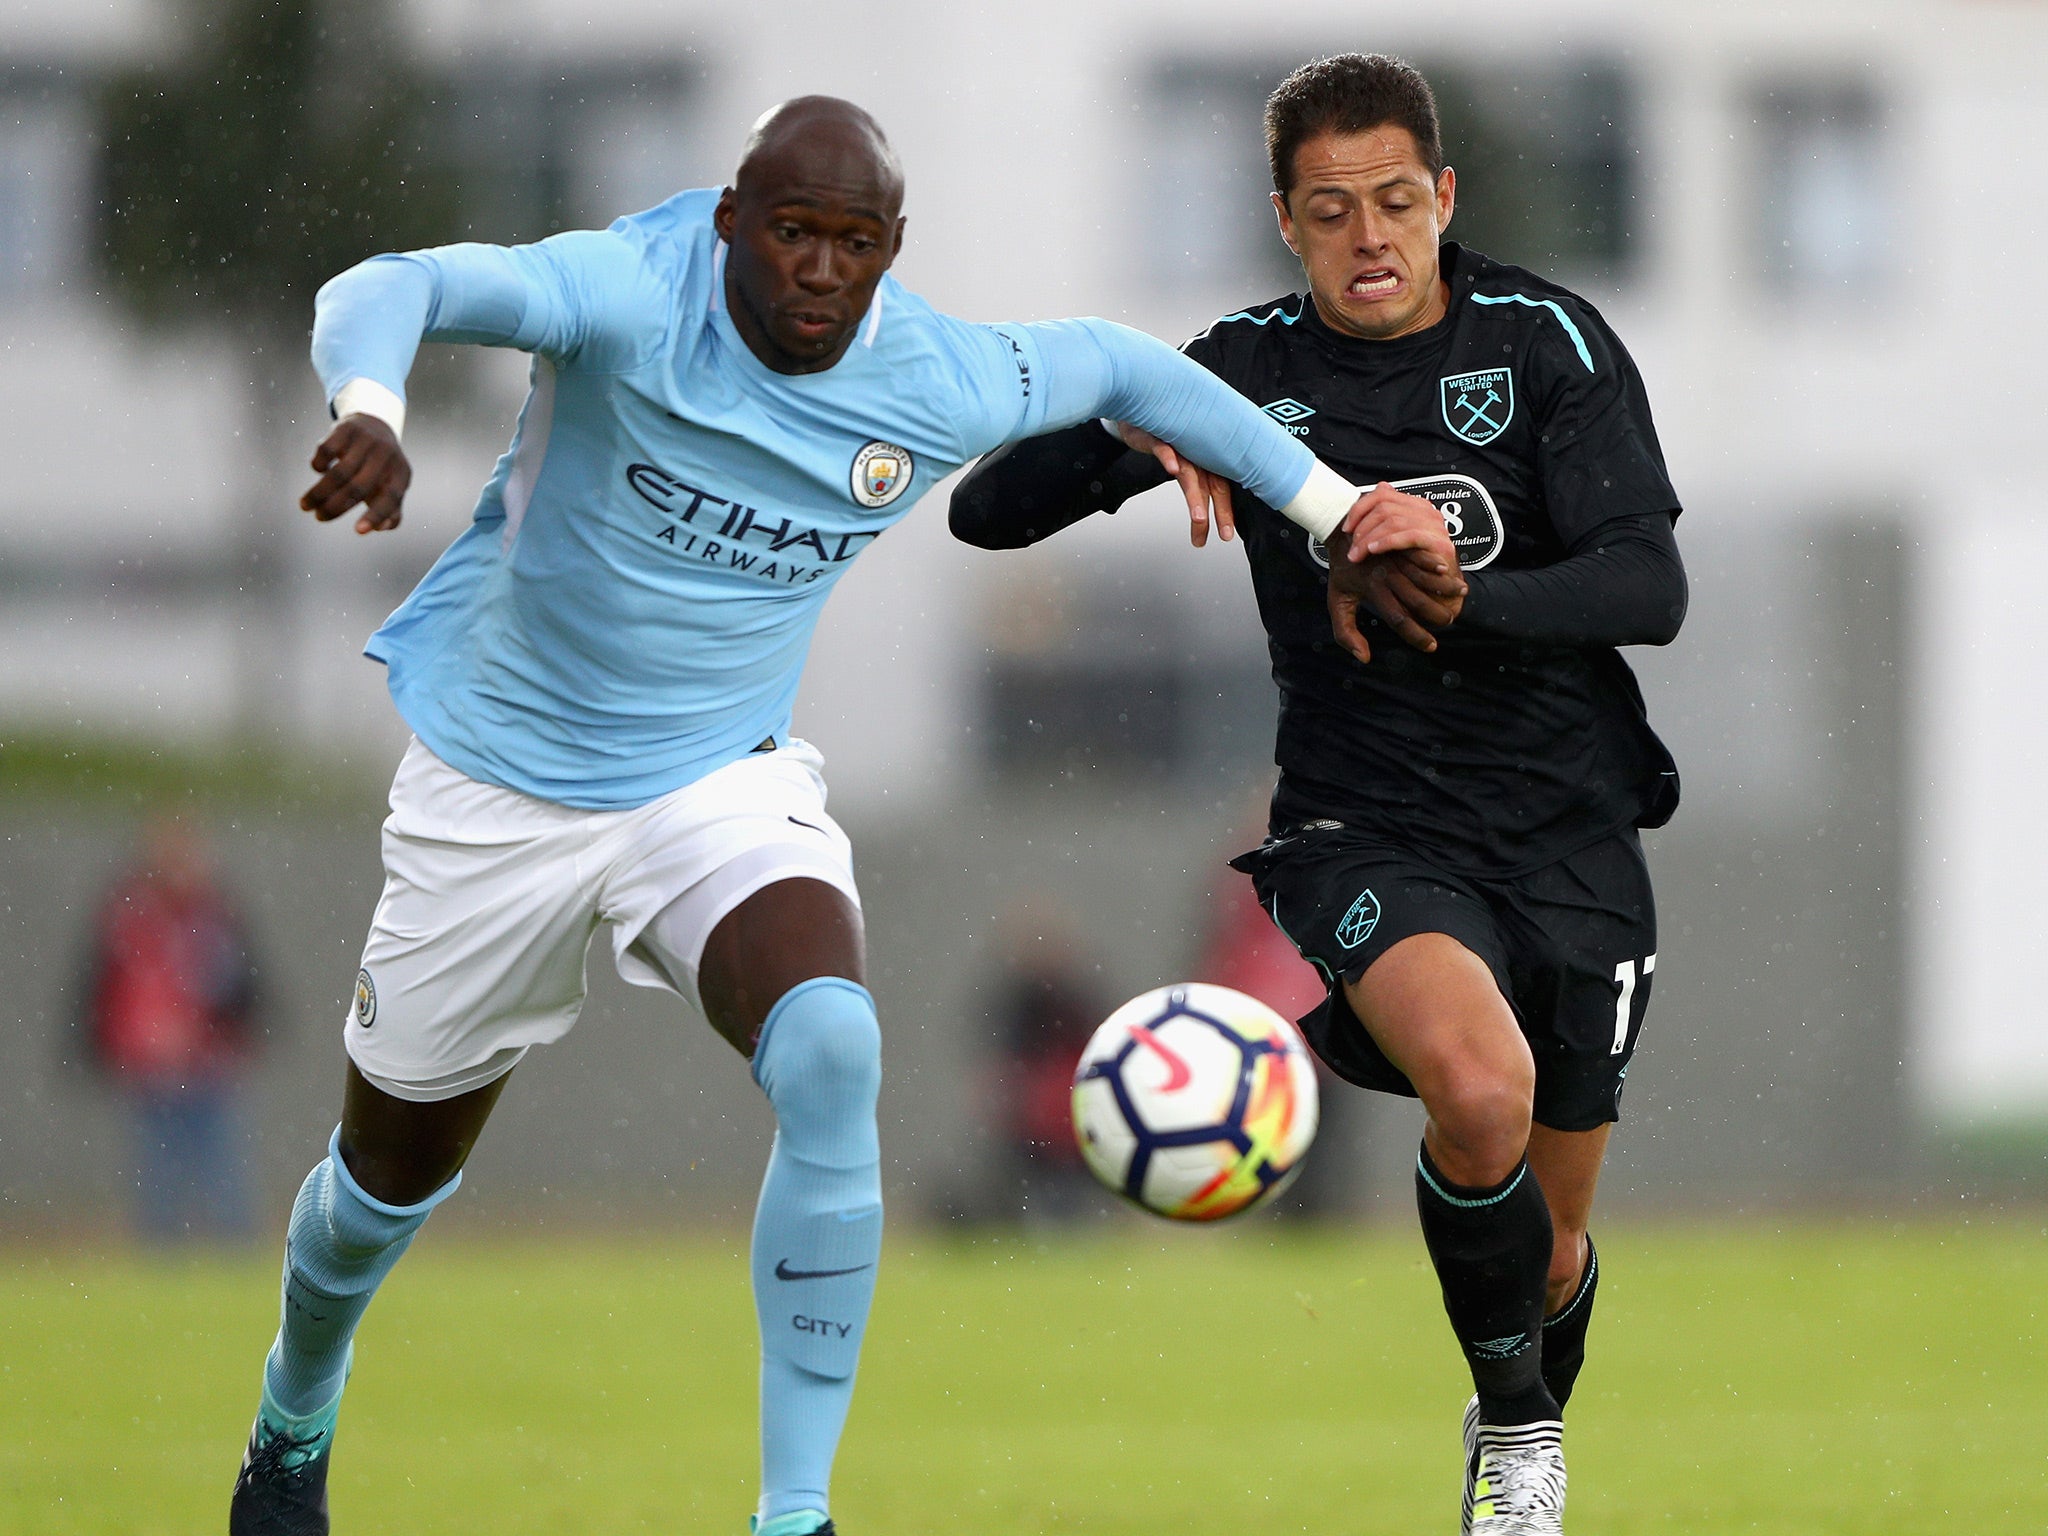 Mangala will need to strike up a rapport with Otamendia quickly